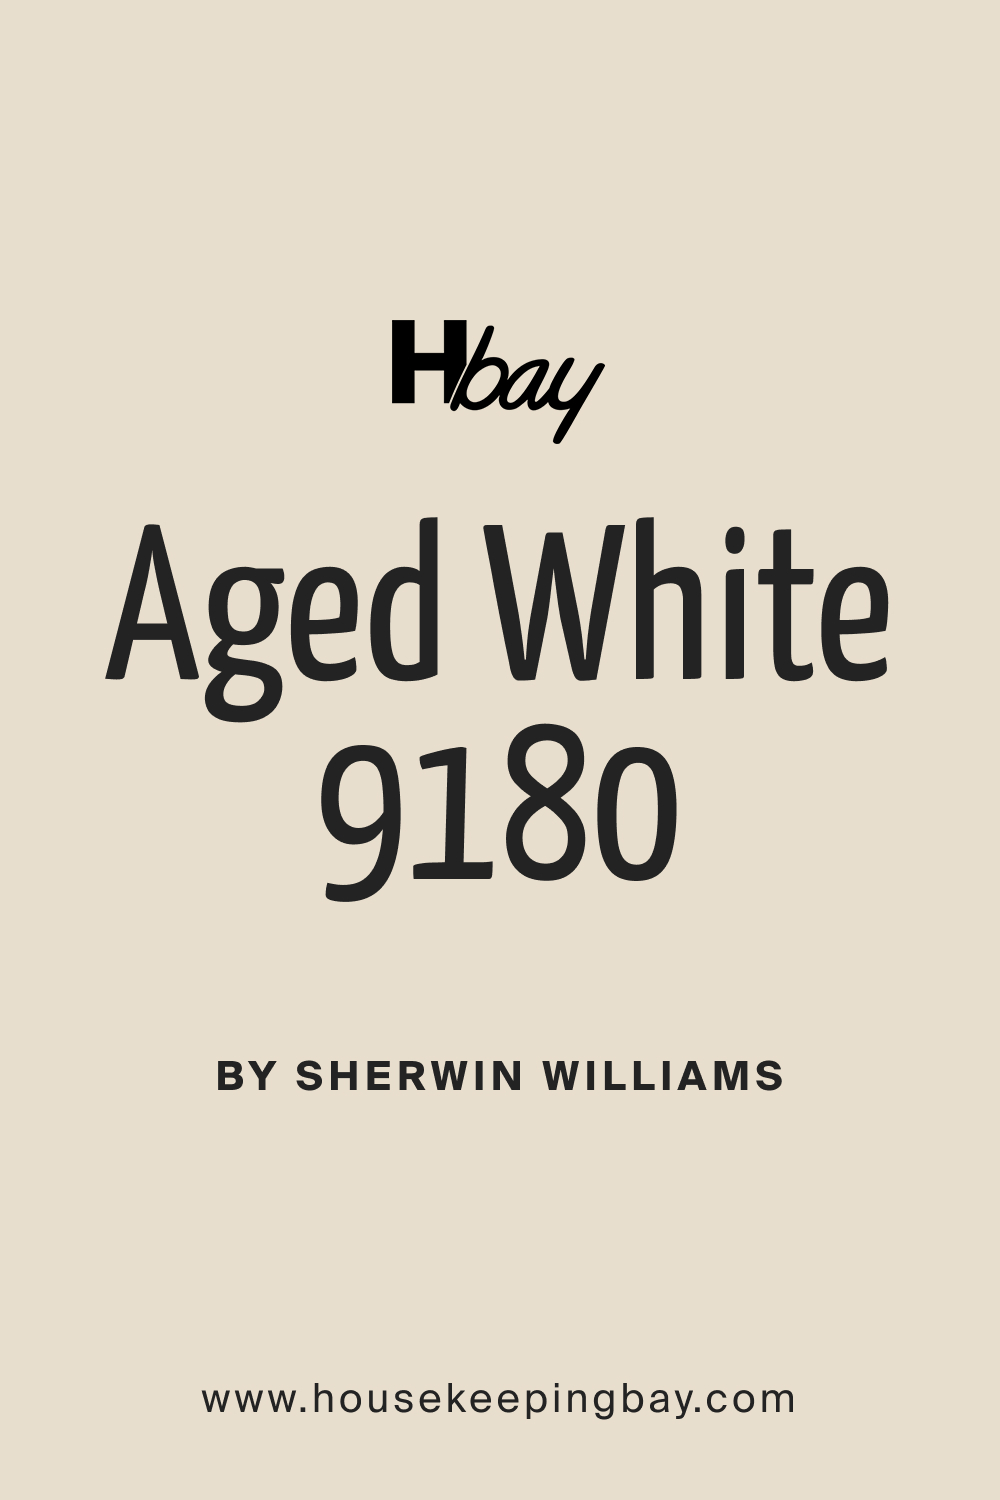 SW 9180 Aged White Paint Color by Sherwin Williams